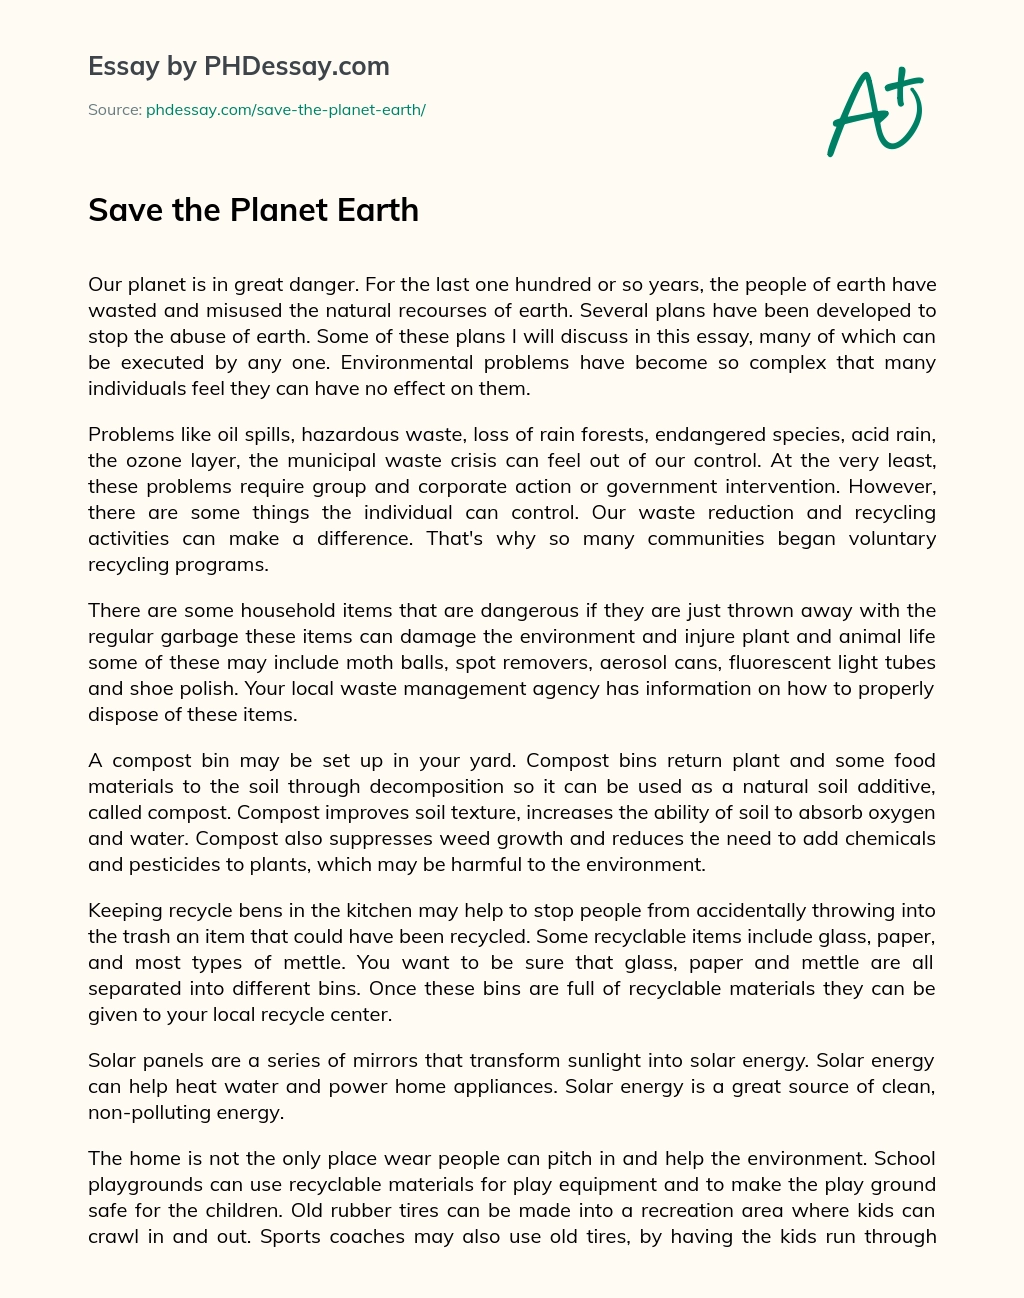 Save the Planet Earth essay